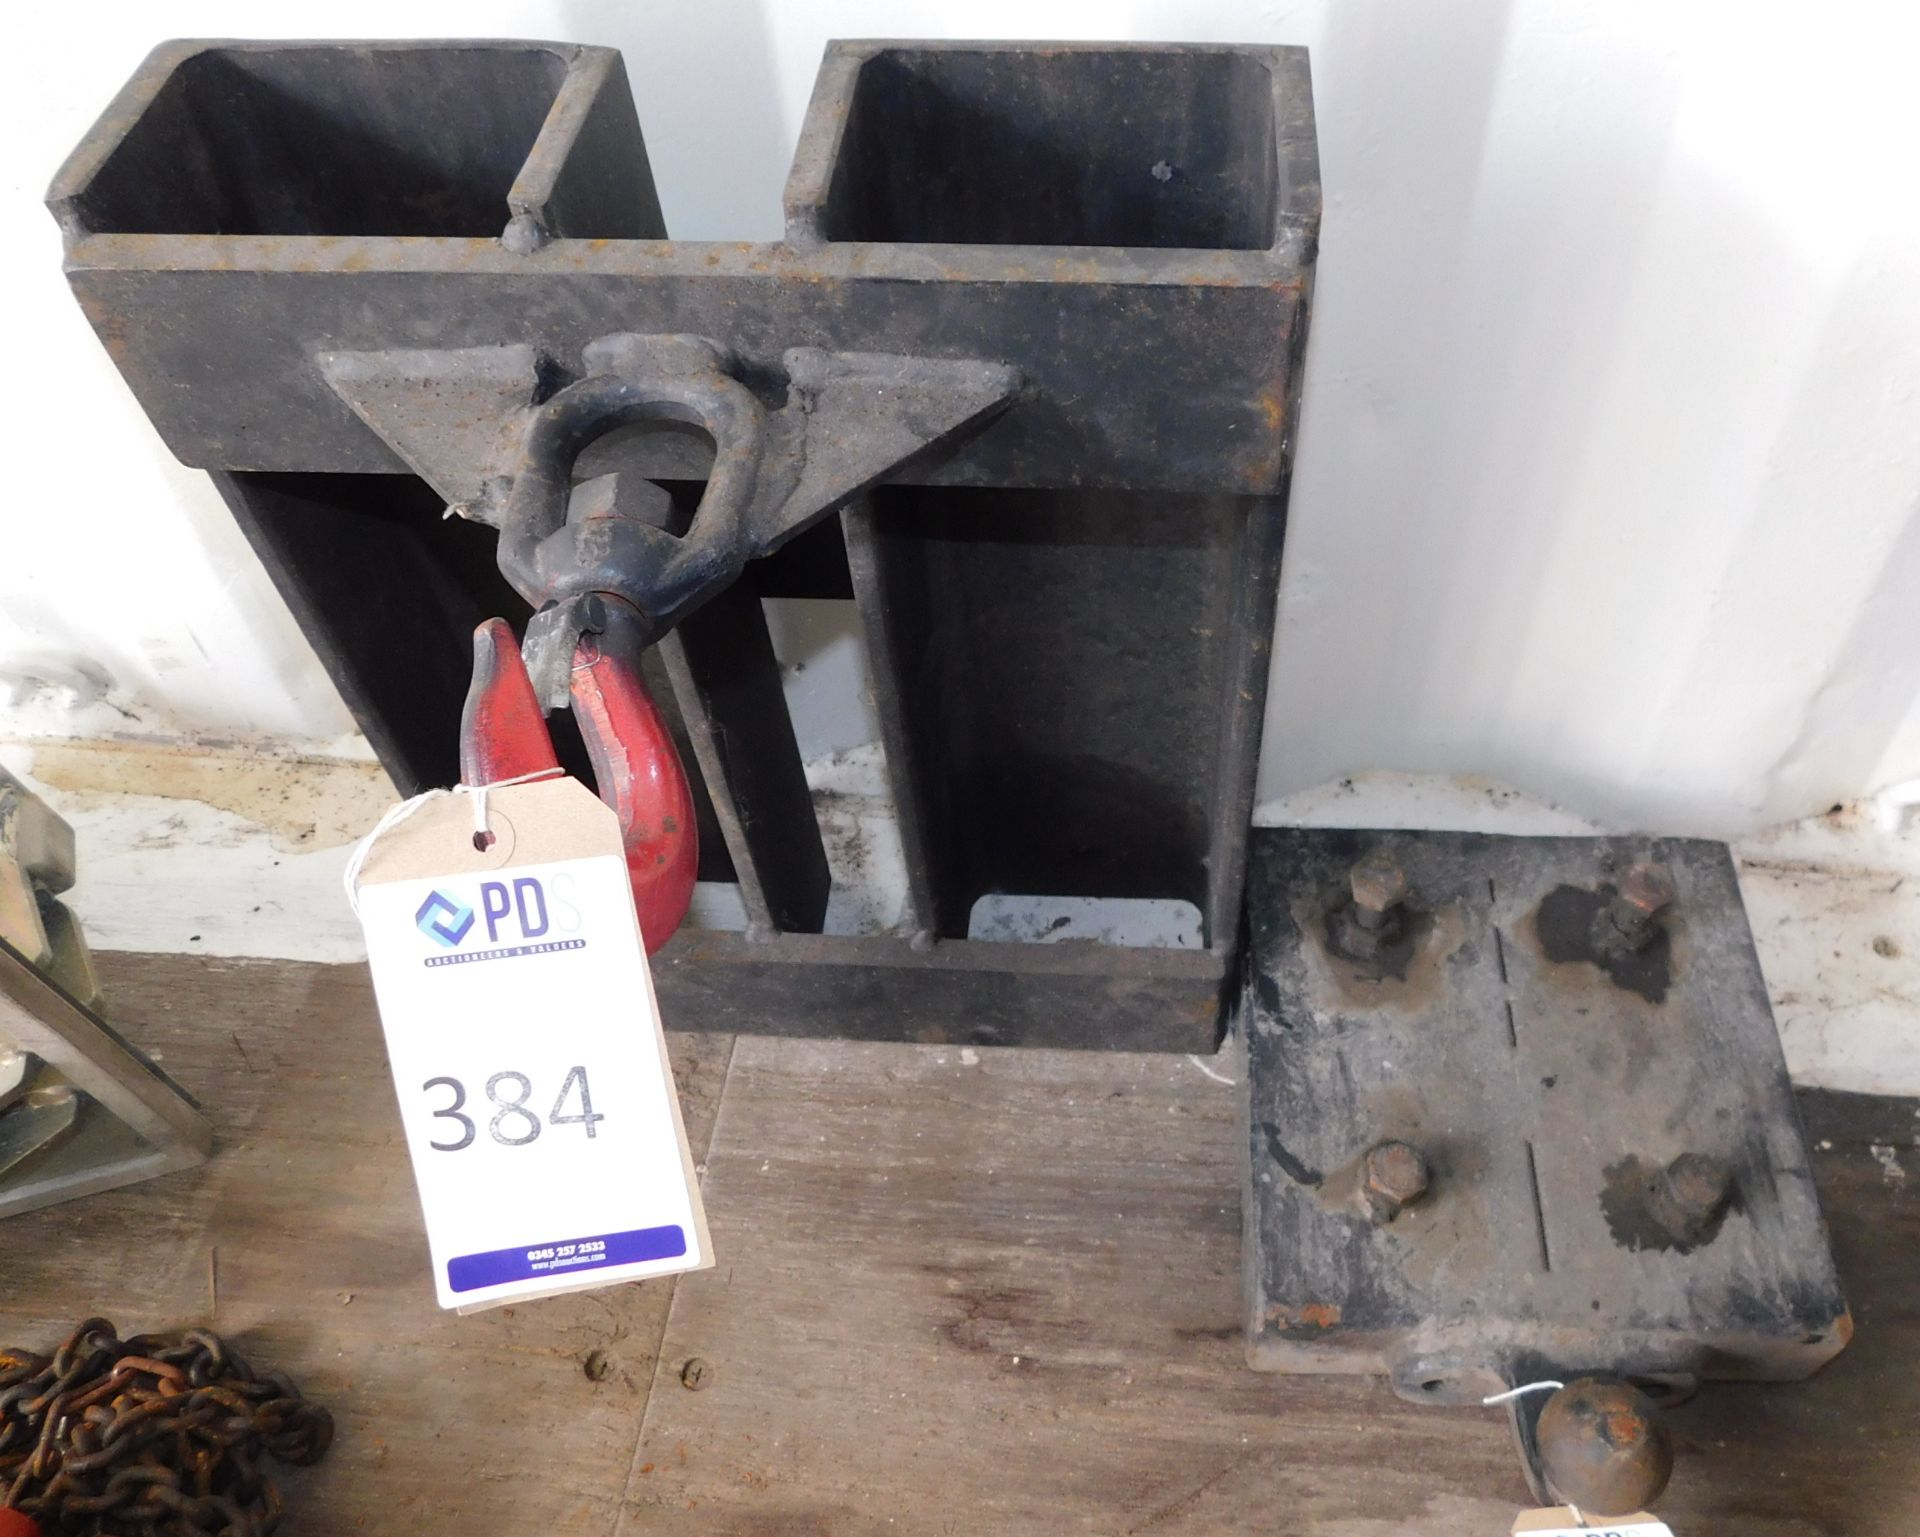 Pair Forklift Attachments (Collection Thursday 23rd or Friday 24th May – PDS Reserve the Right to